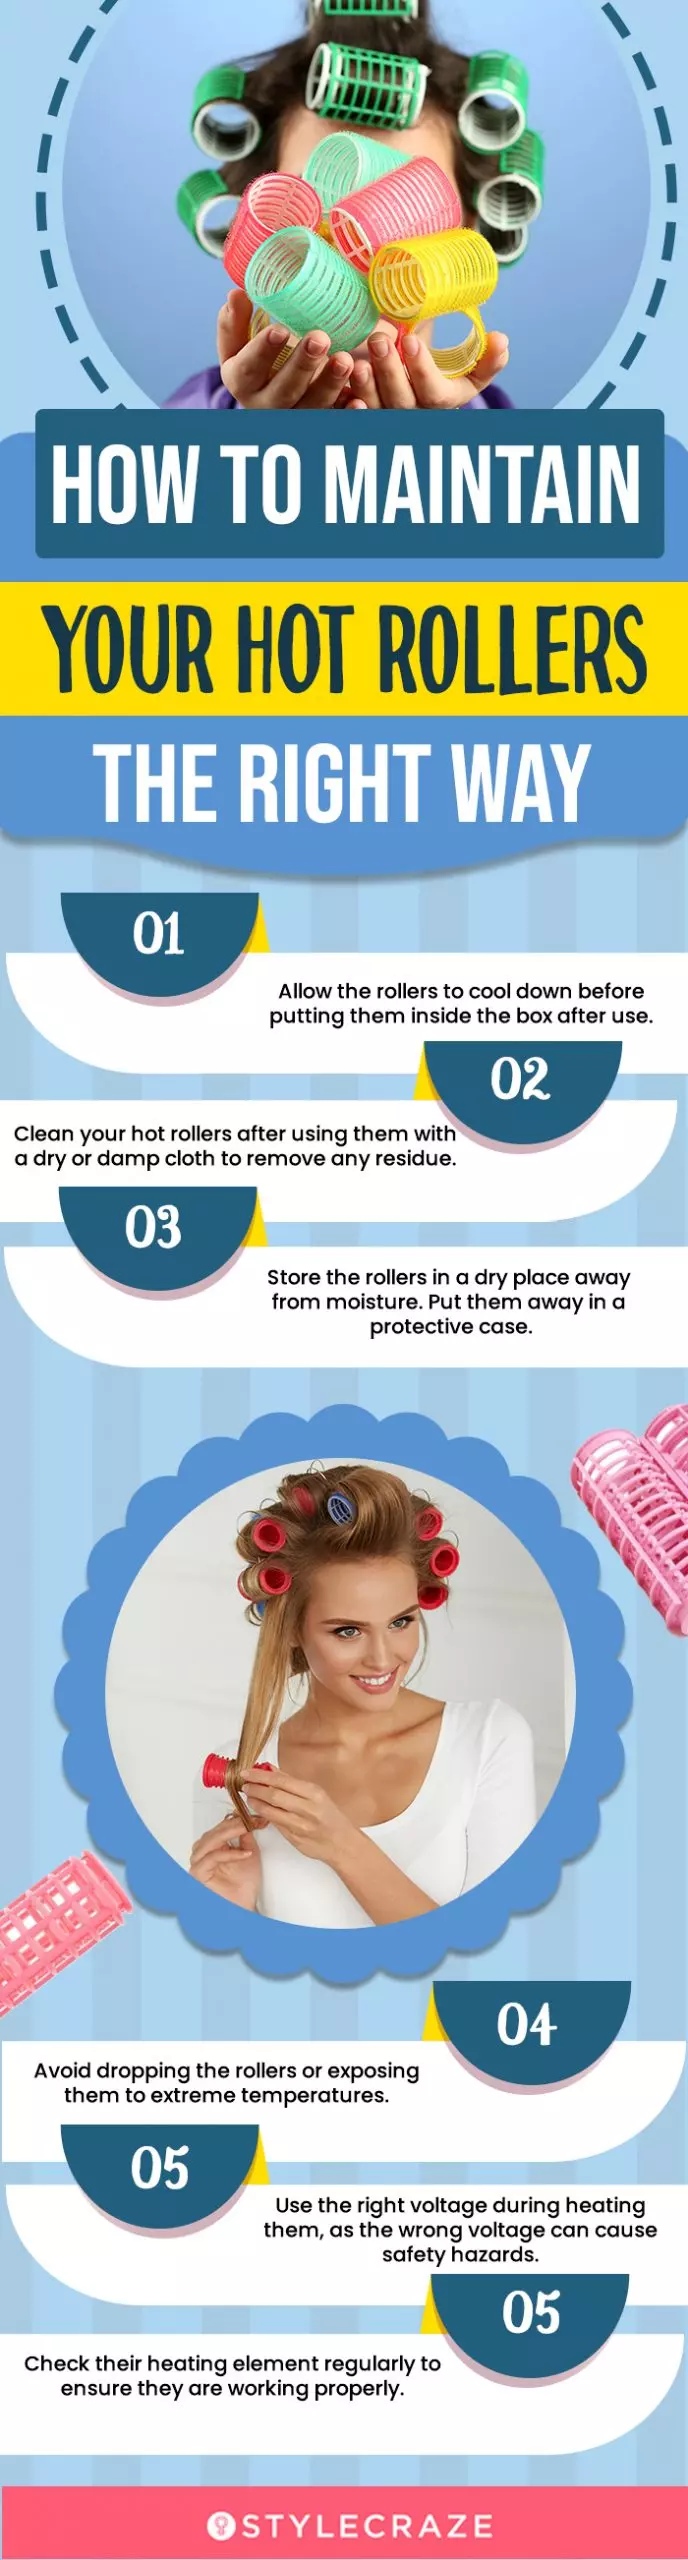 How To Maintain Your Hot Rollers The Right Way (infographic)